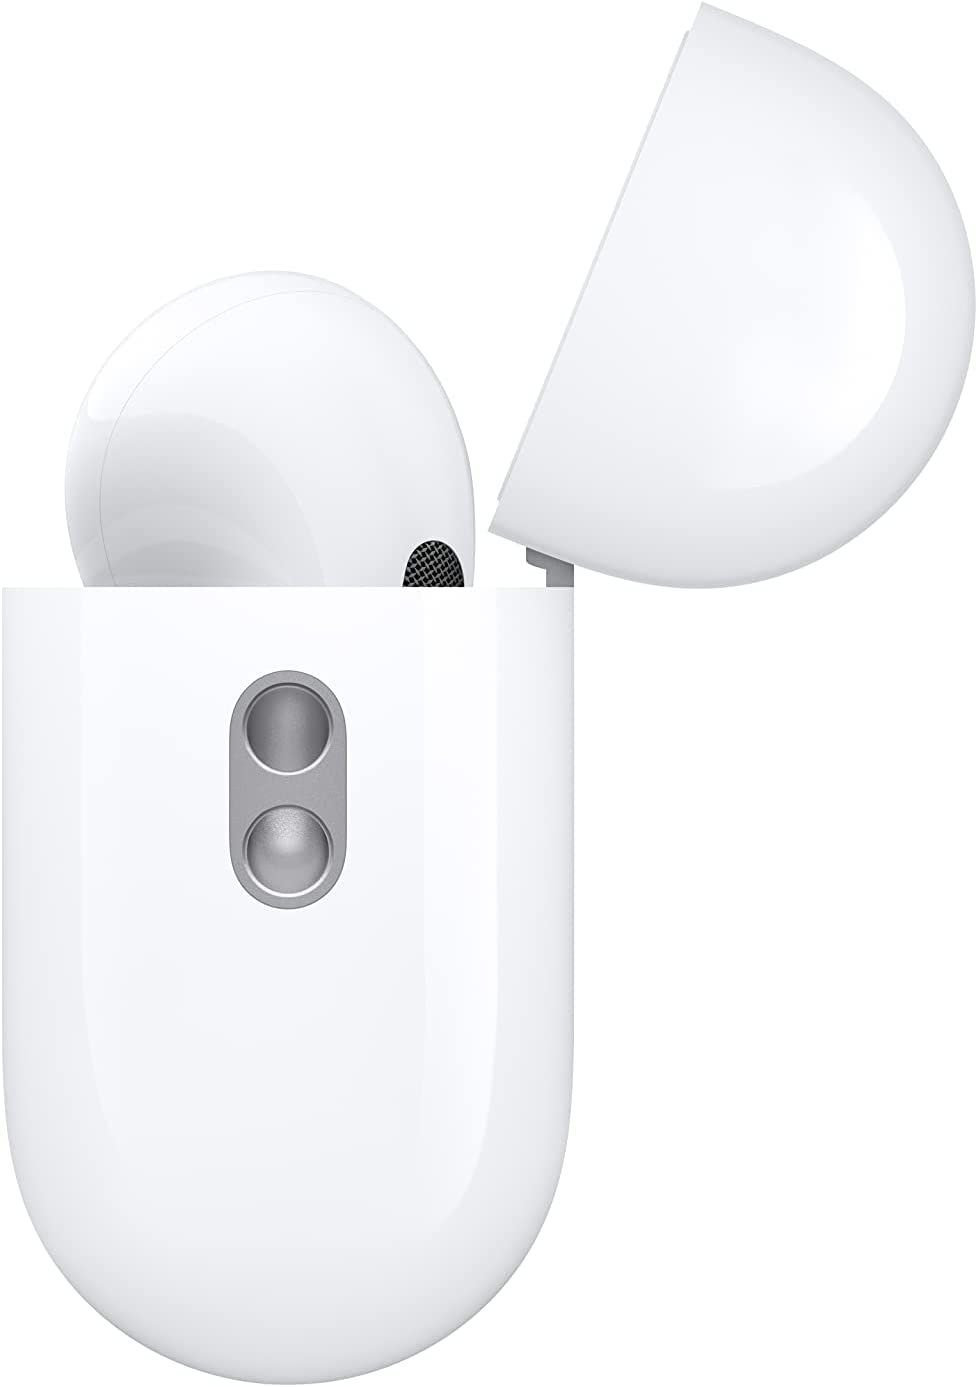 apple airpods pro 2 3